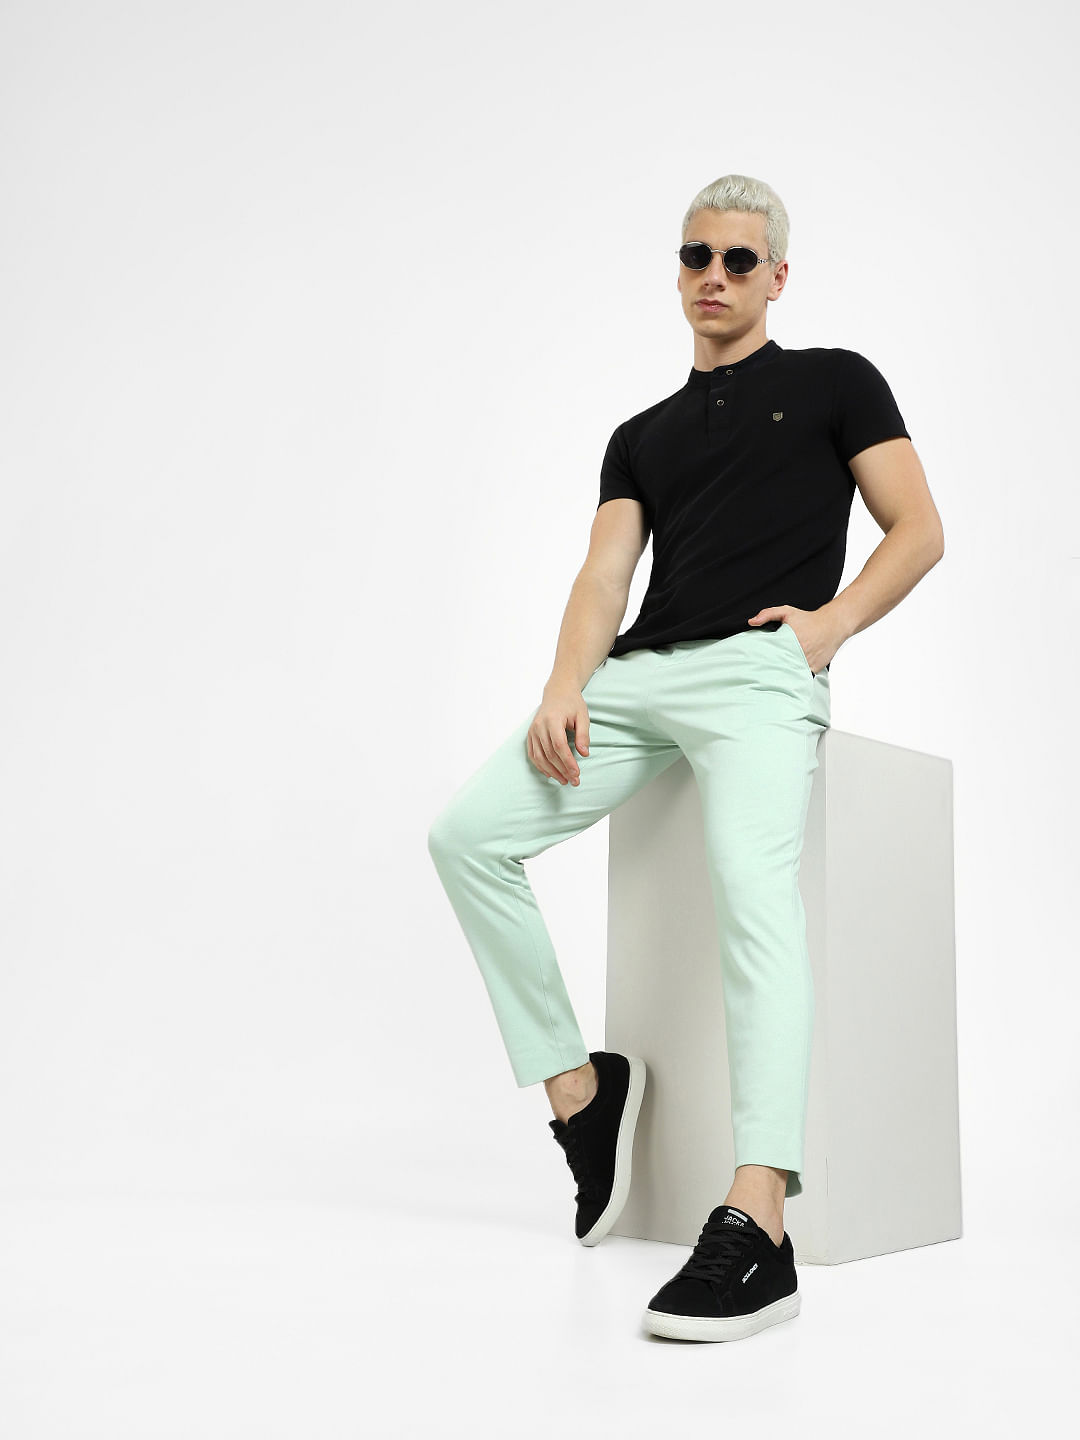 Chinos for Men- Summer Trousers ⋆ Best Fashion Blog For Men -  TheUnstitchd.com